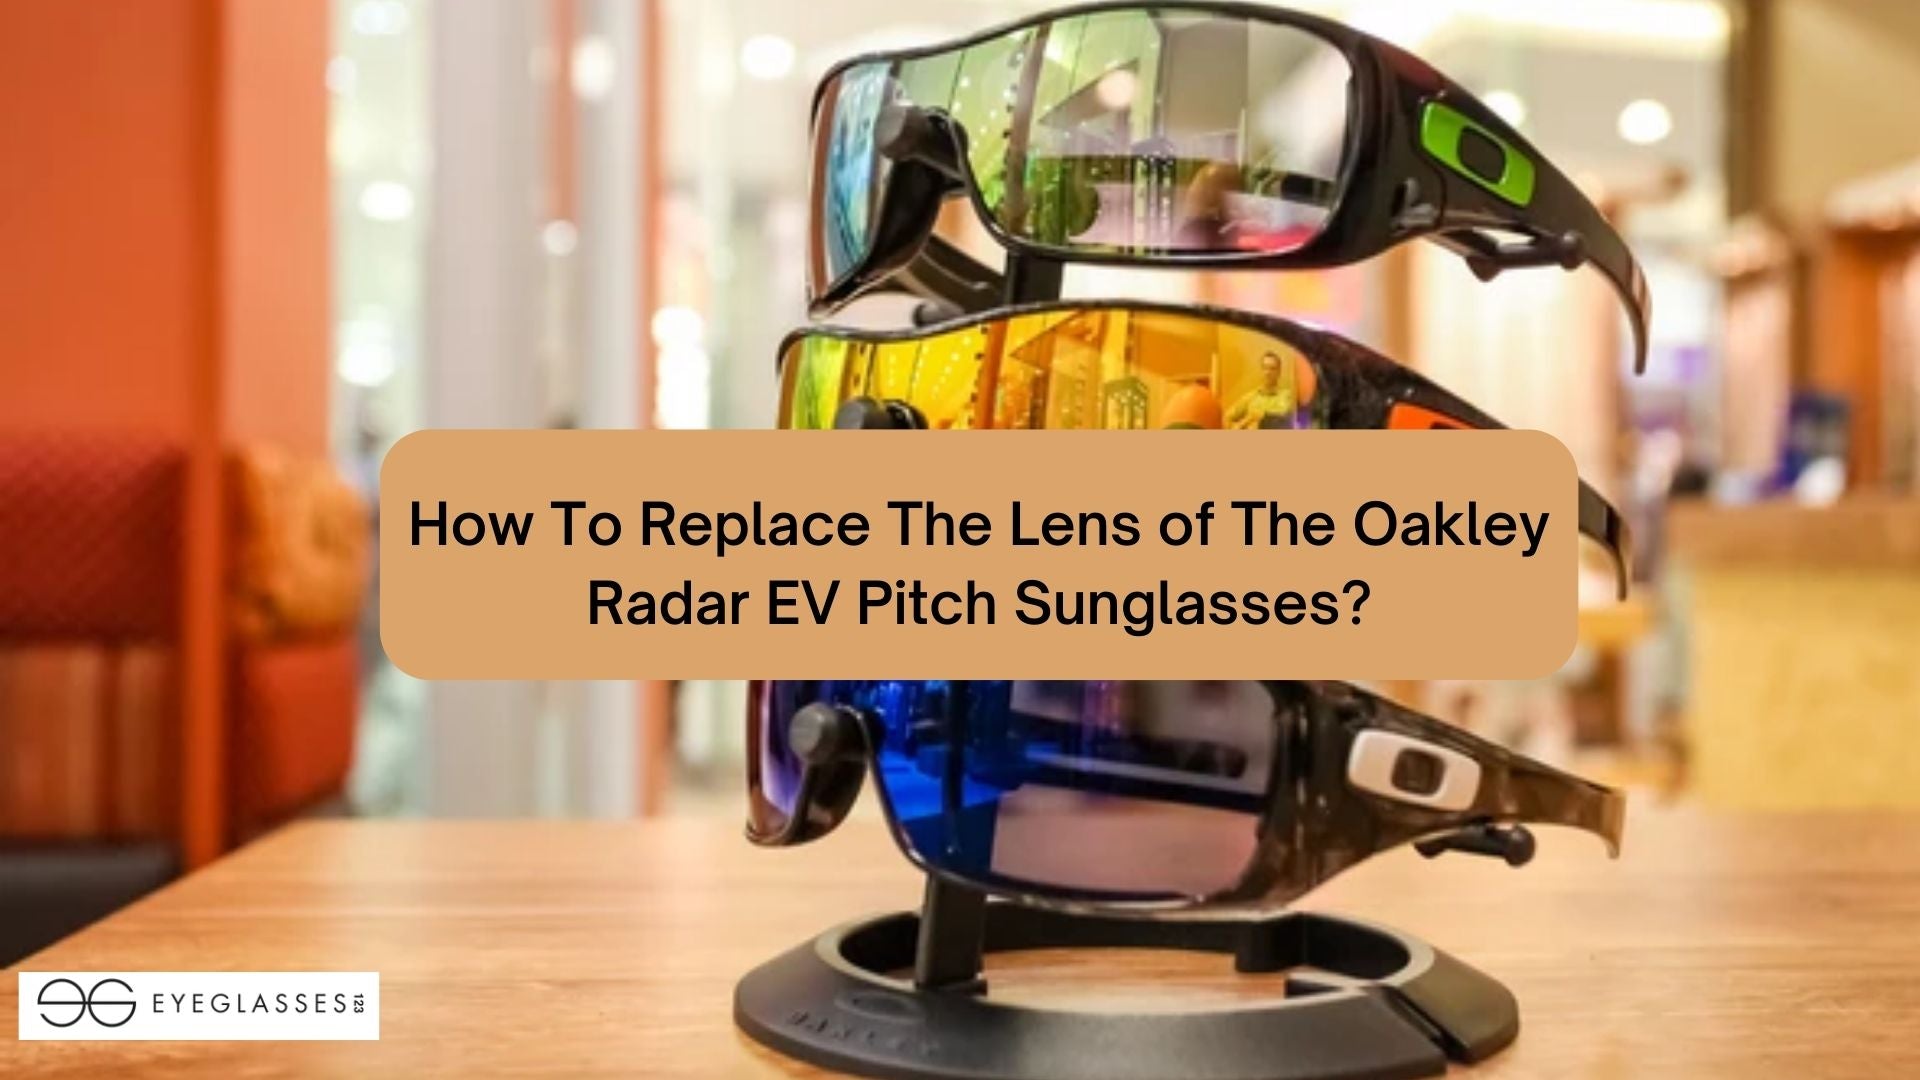 How To Replace The Lens of The Oakley Radar EV Pitch Sunglasses?